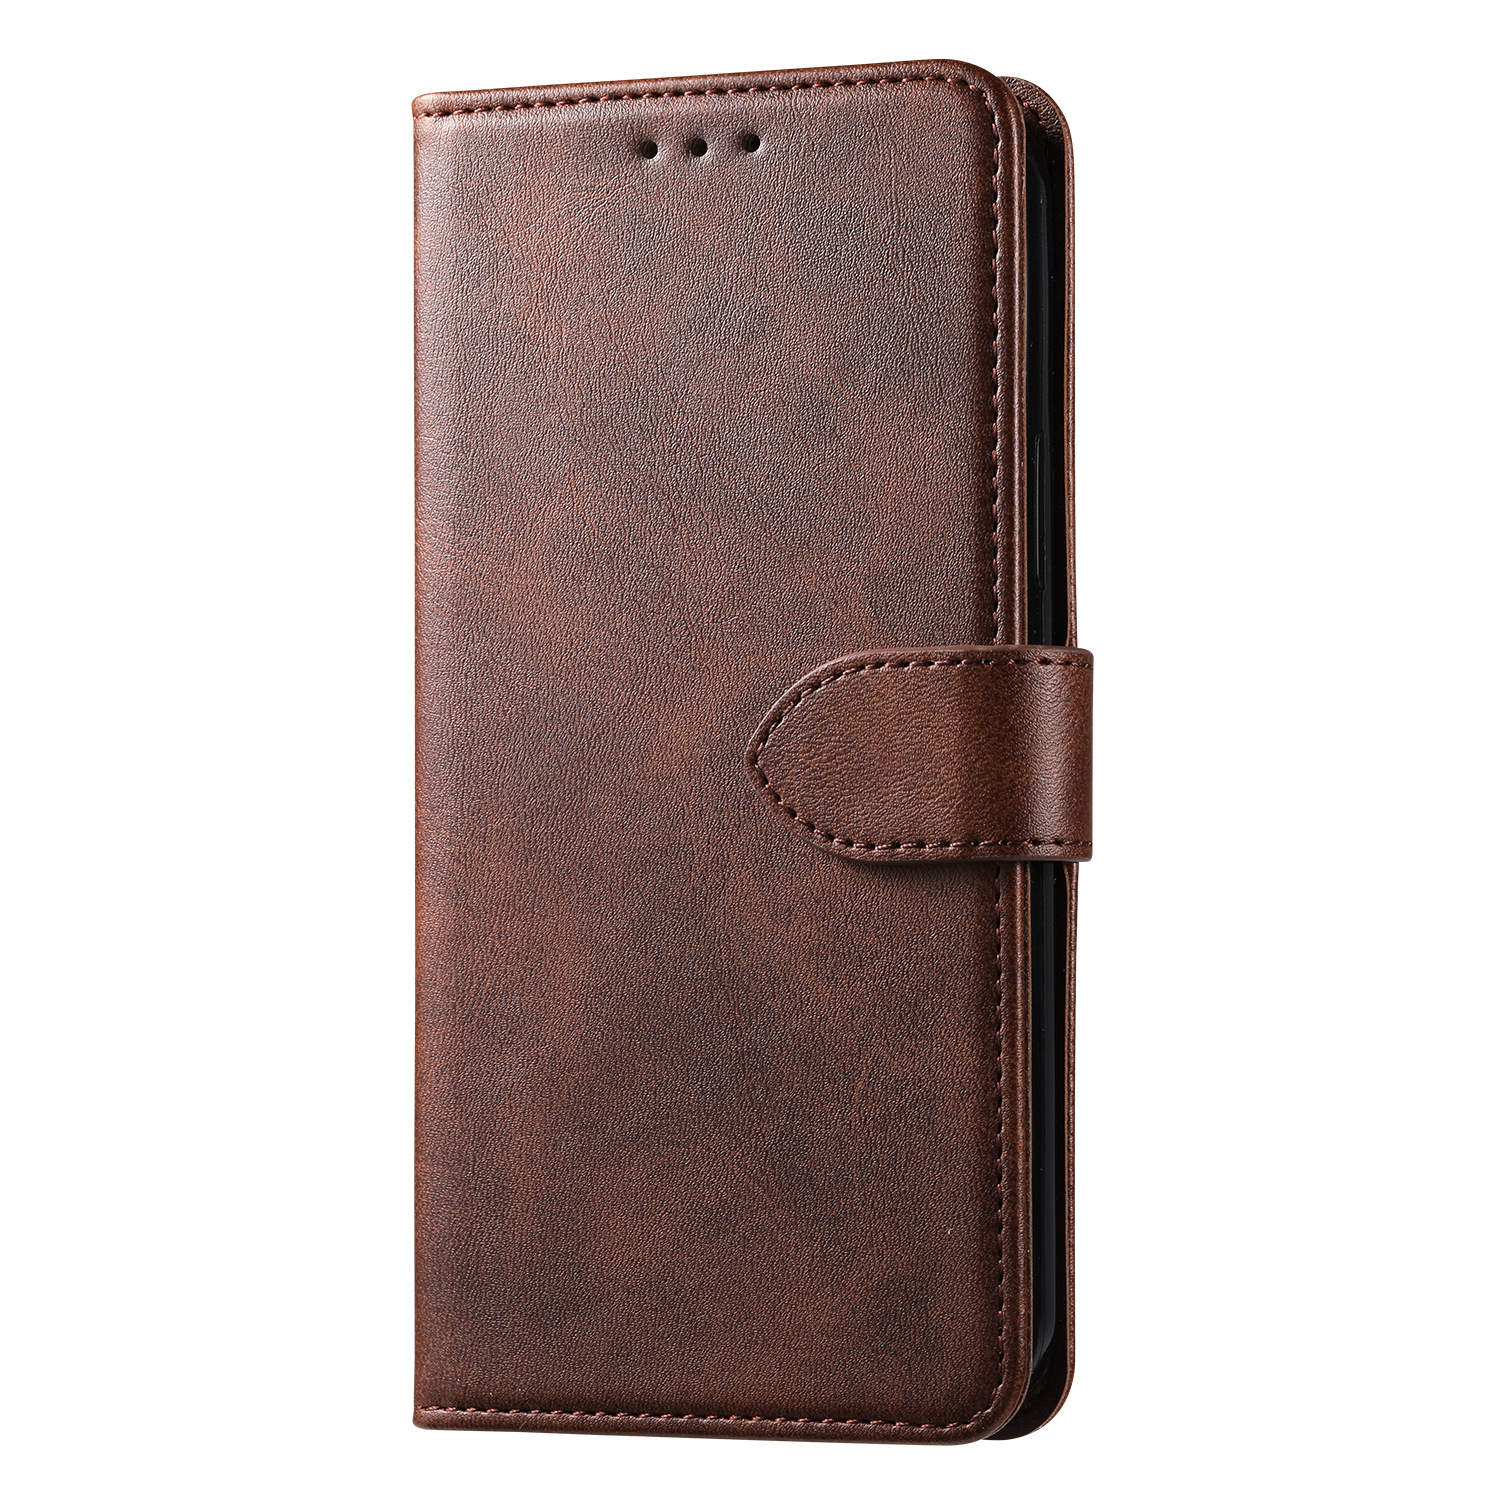 Suitable for Iphone14 Wallet Leather Case 8plus Phone Case Calfskin Leather Protective Case Card Holder IPhone7